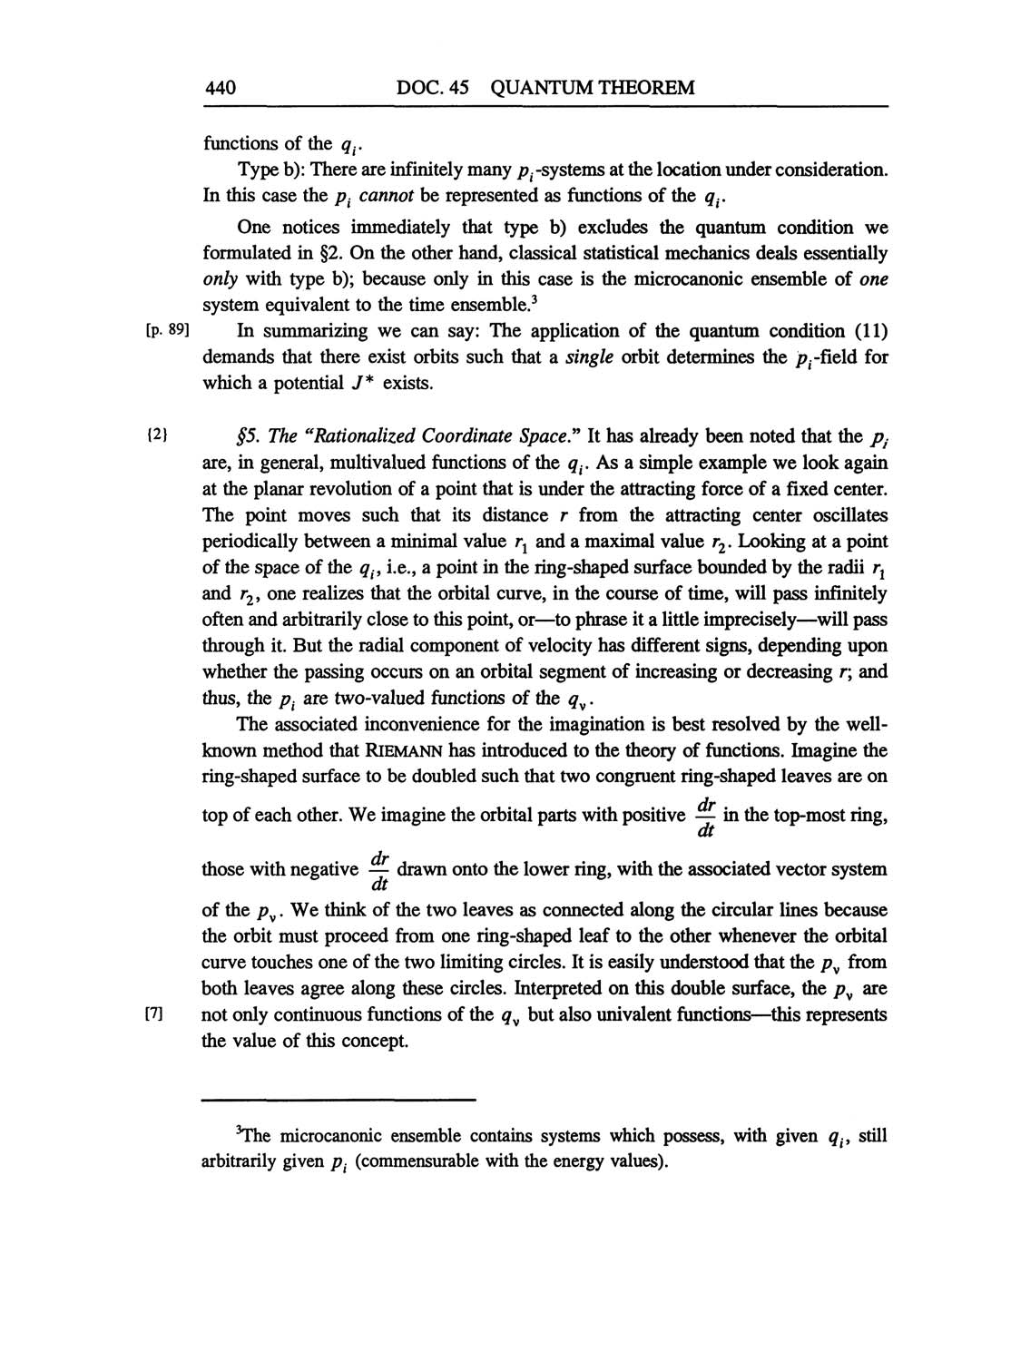 Volume 6: The Berlin Years: Writings, 1914-1917 (English translation supplement) page 440